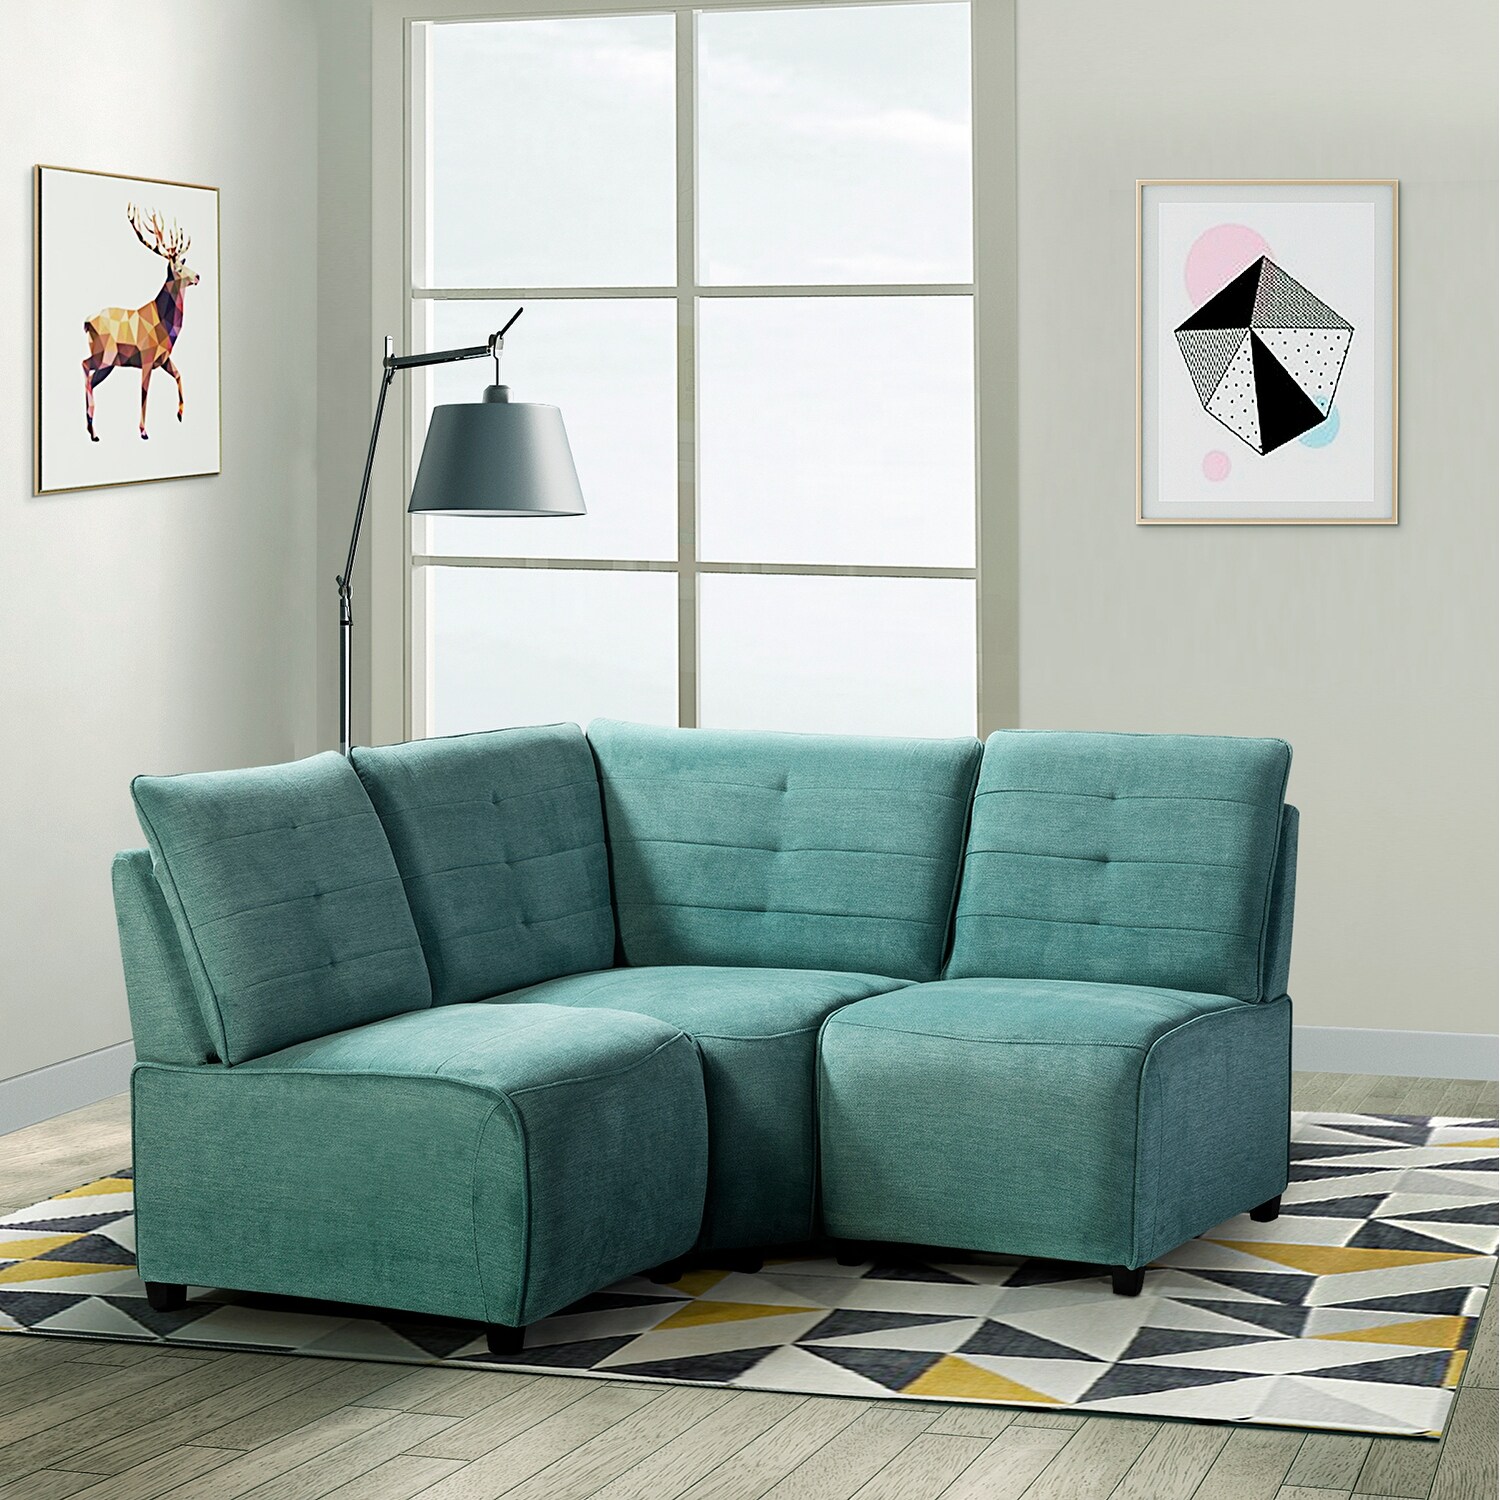 JAYDEN CREATION Melissa Cushions Padded Corner Sectional with Tufted Back